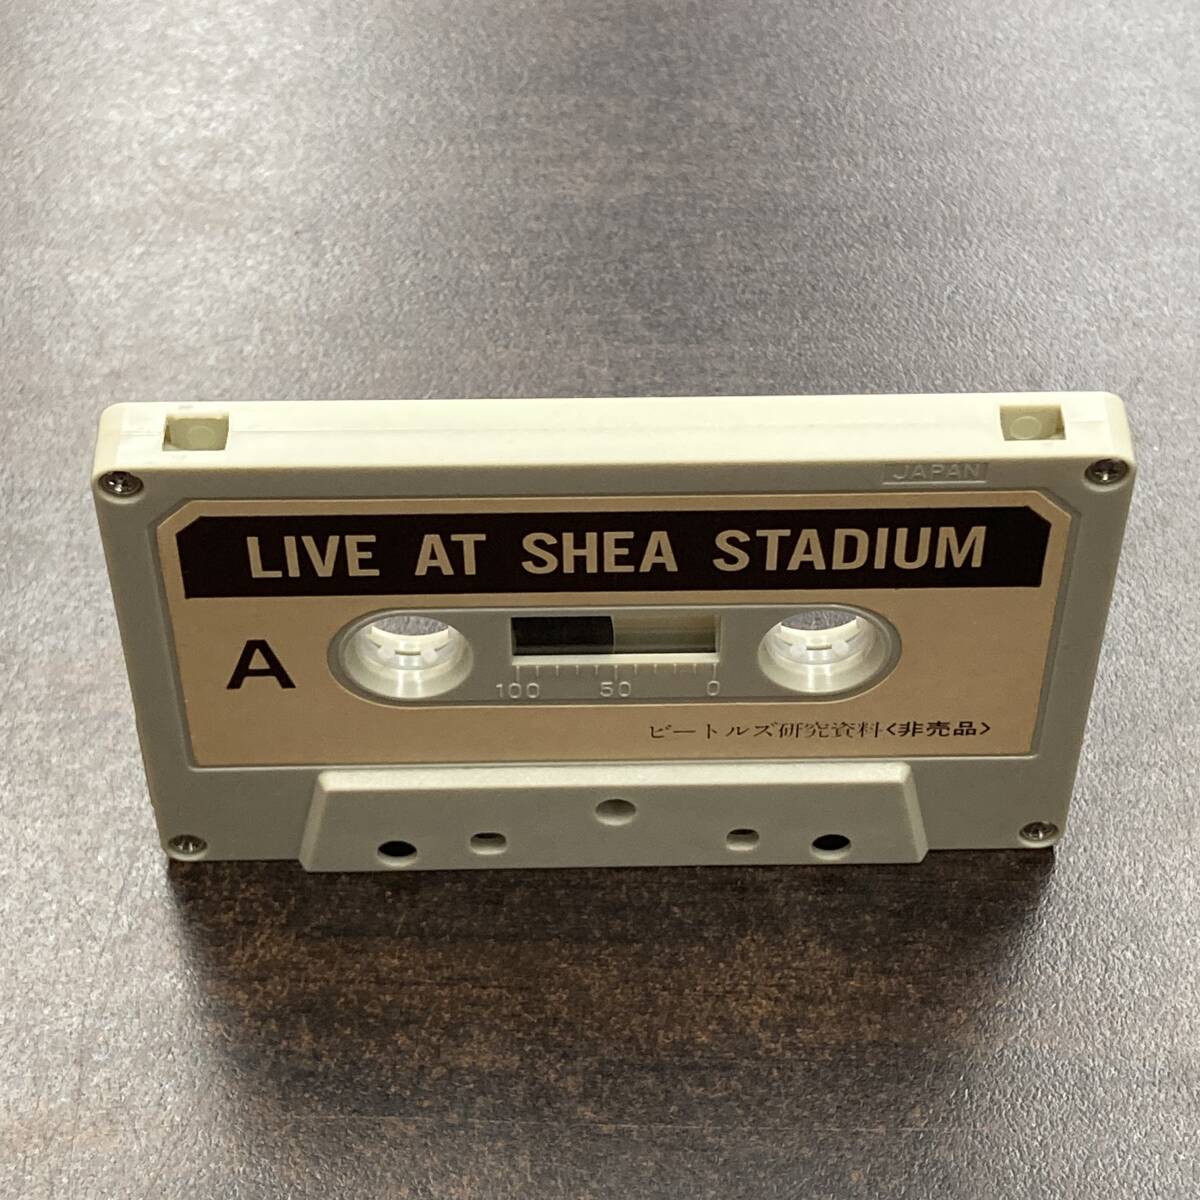 1215M ザ・ビートルズ 研究資料 LIVE AT SHEA STADIUM カセットテープ / THE BEATLES Research materials Cassette Tapeの画像2